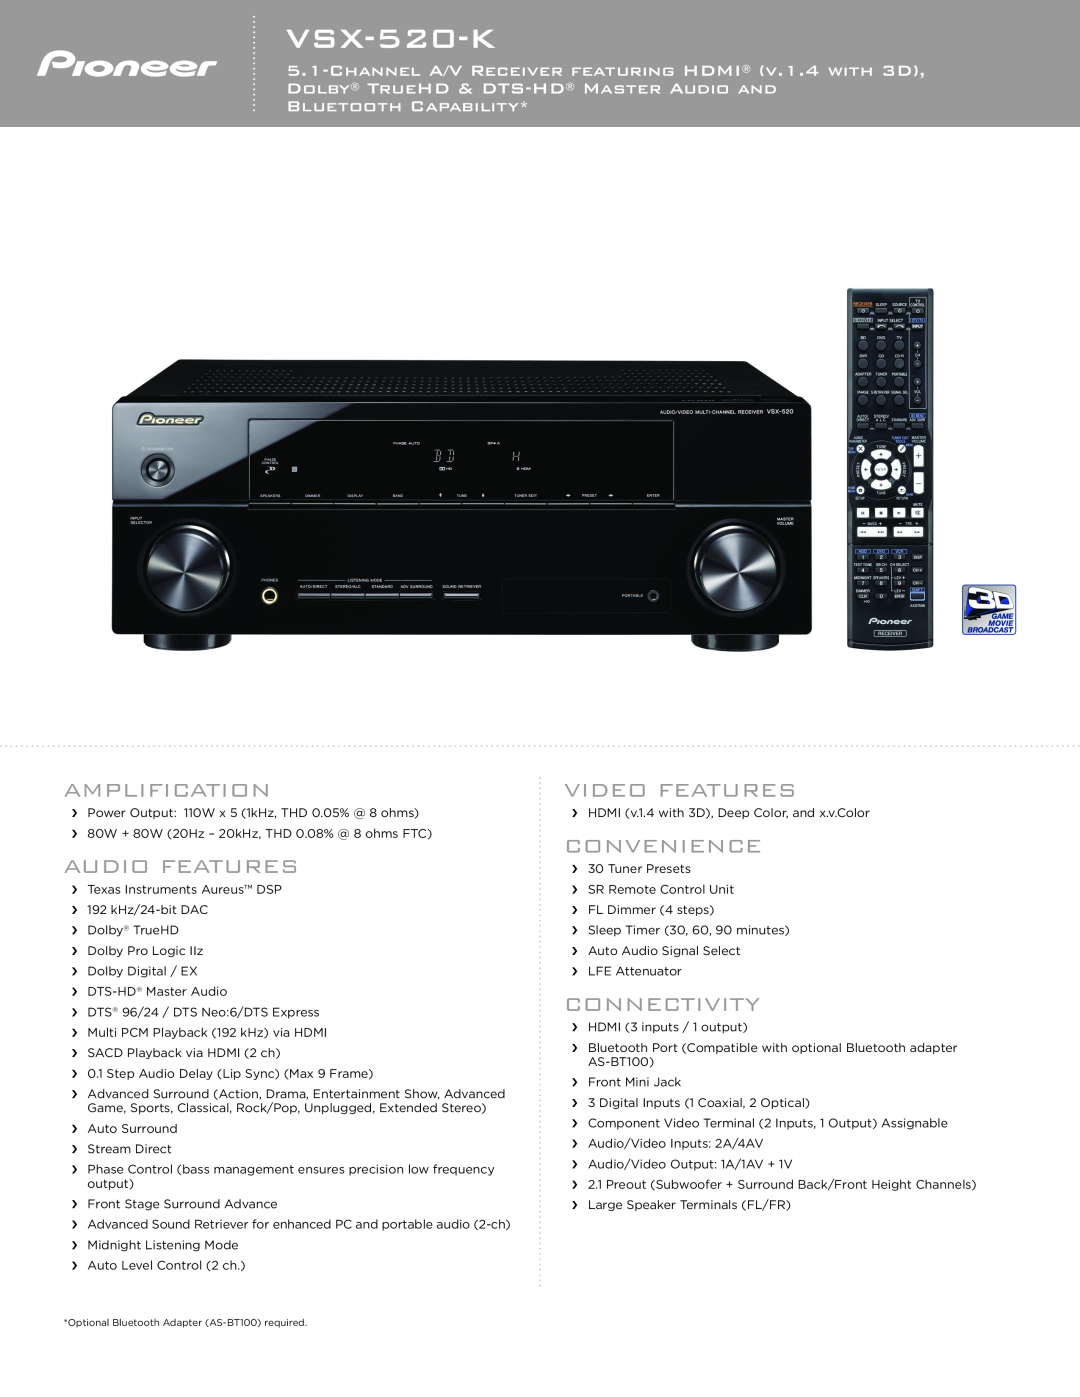 Pioneer VSX-520-K manual Amplification, Audio Features, Video Features, Convenience, Connectivity 